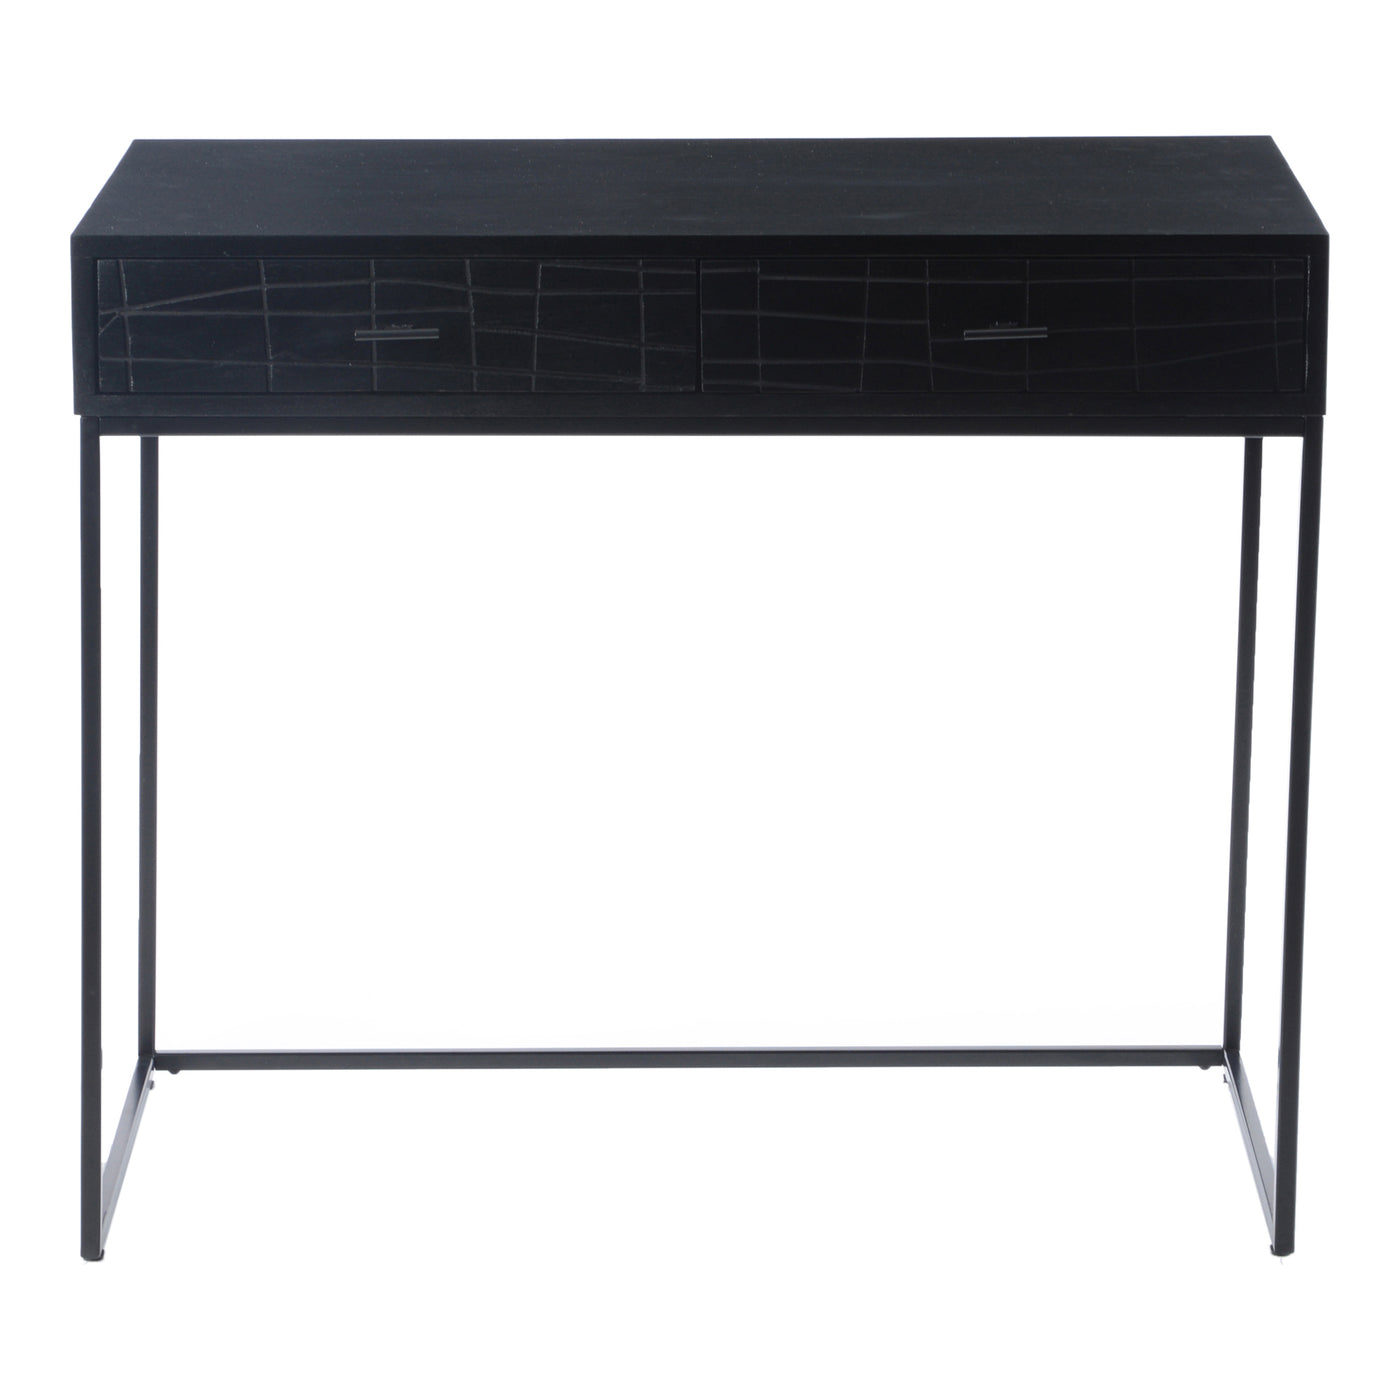 A slick black look. The Atelier desk features two sliding drawers with a textured front and a cool iron frame that support...